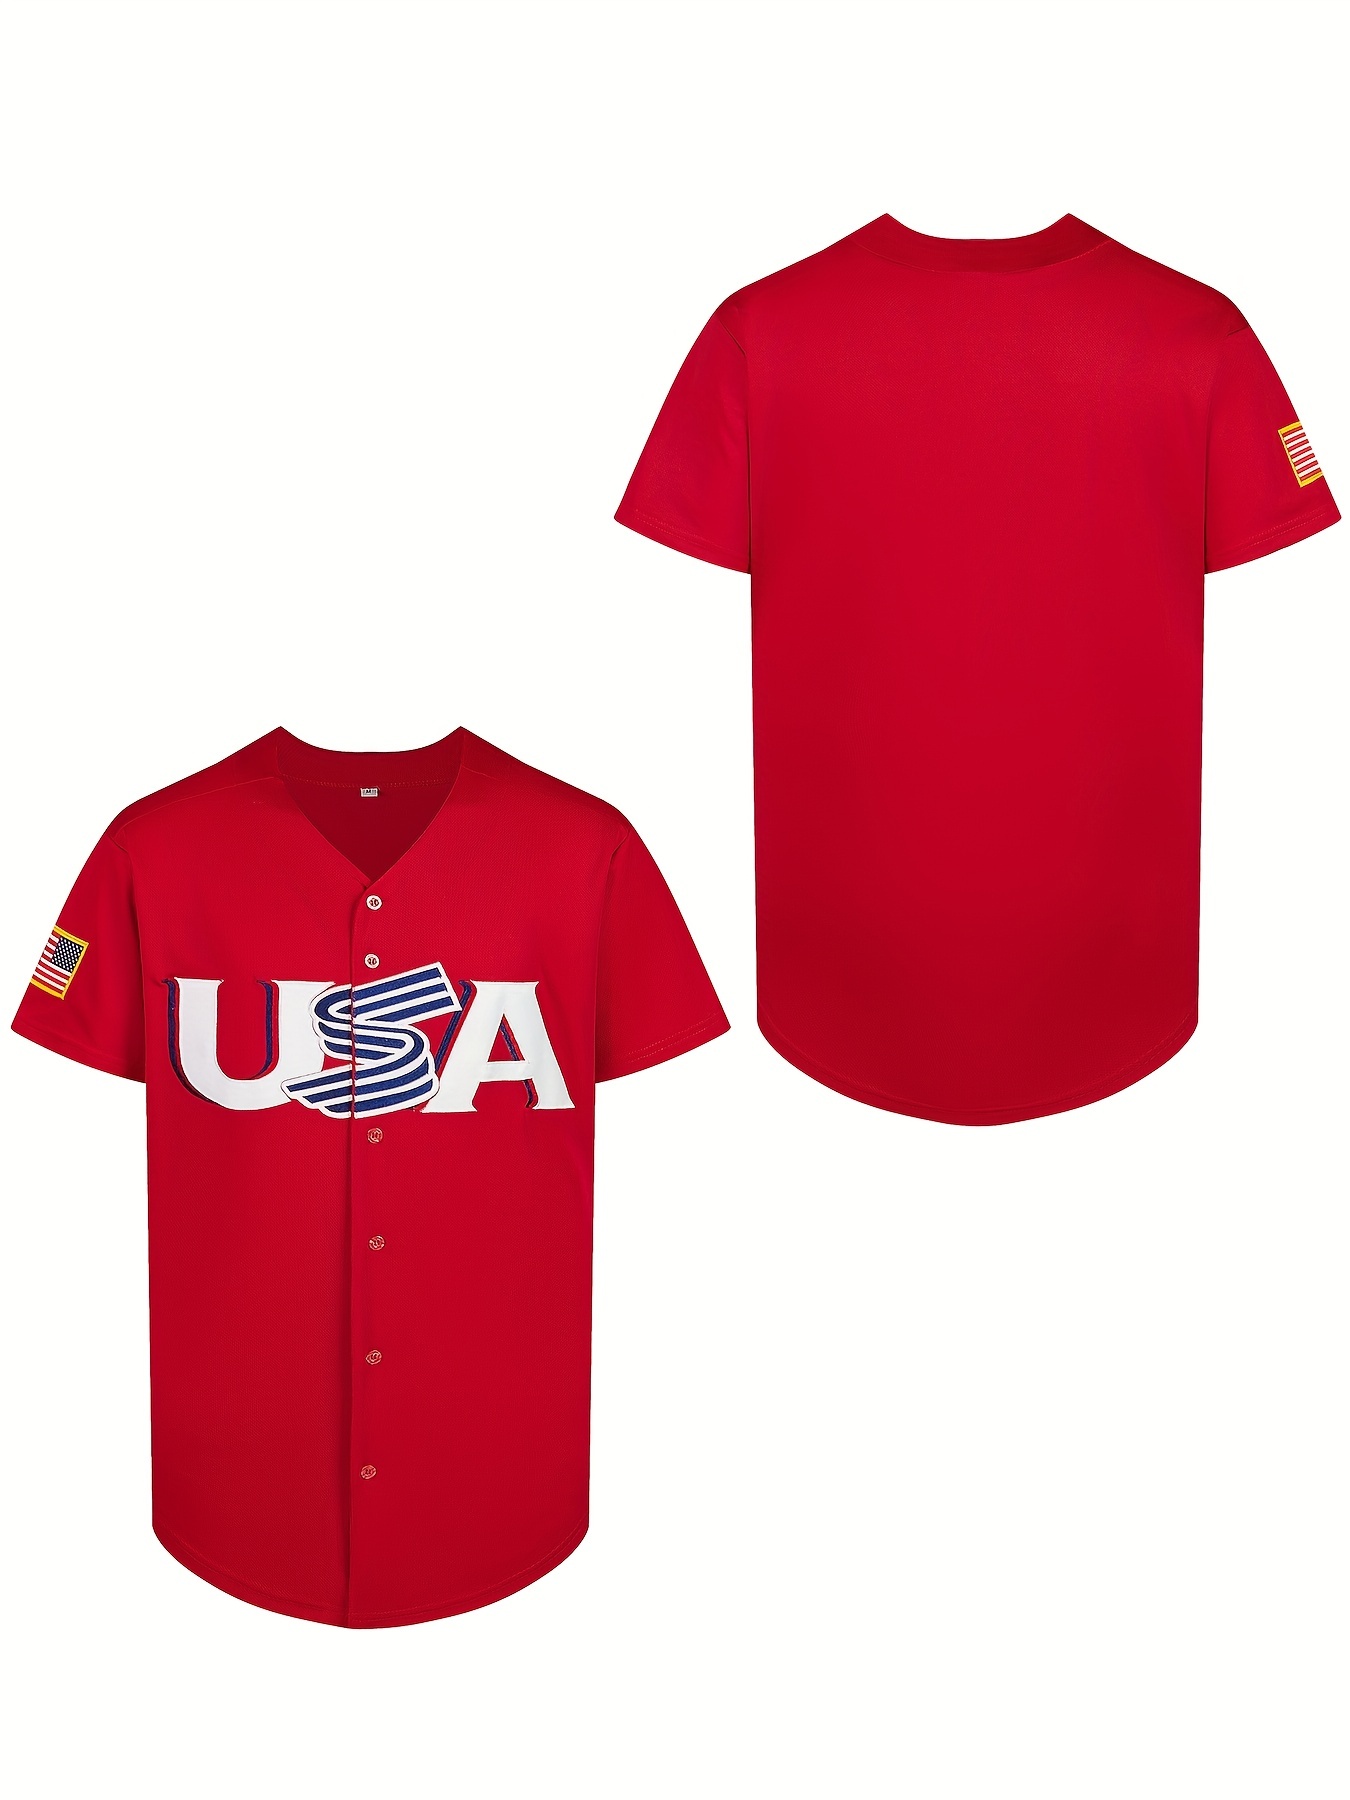 Custom Team White Baseball Authentic White Red Strip Throwback Jersey Shirt  Red